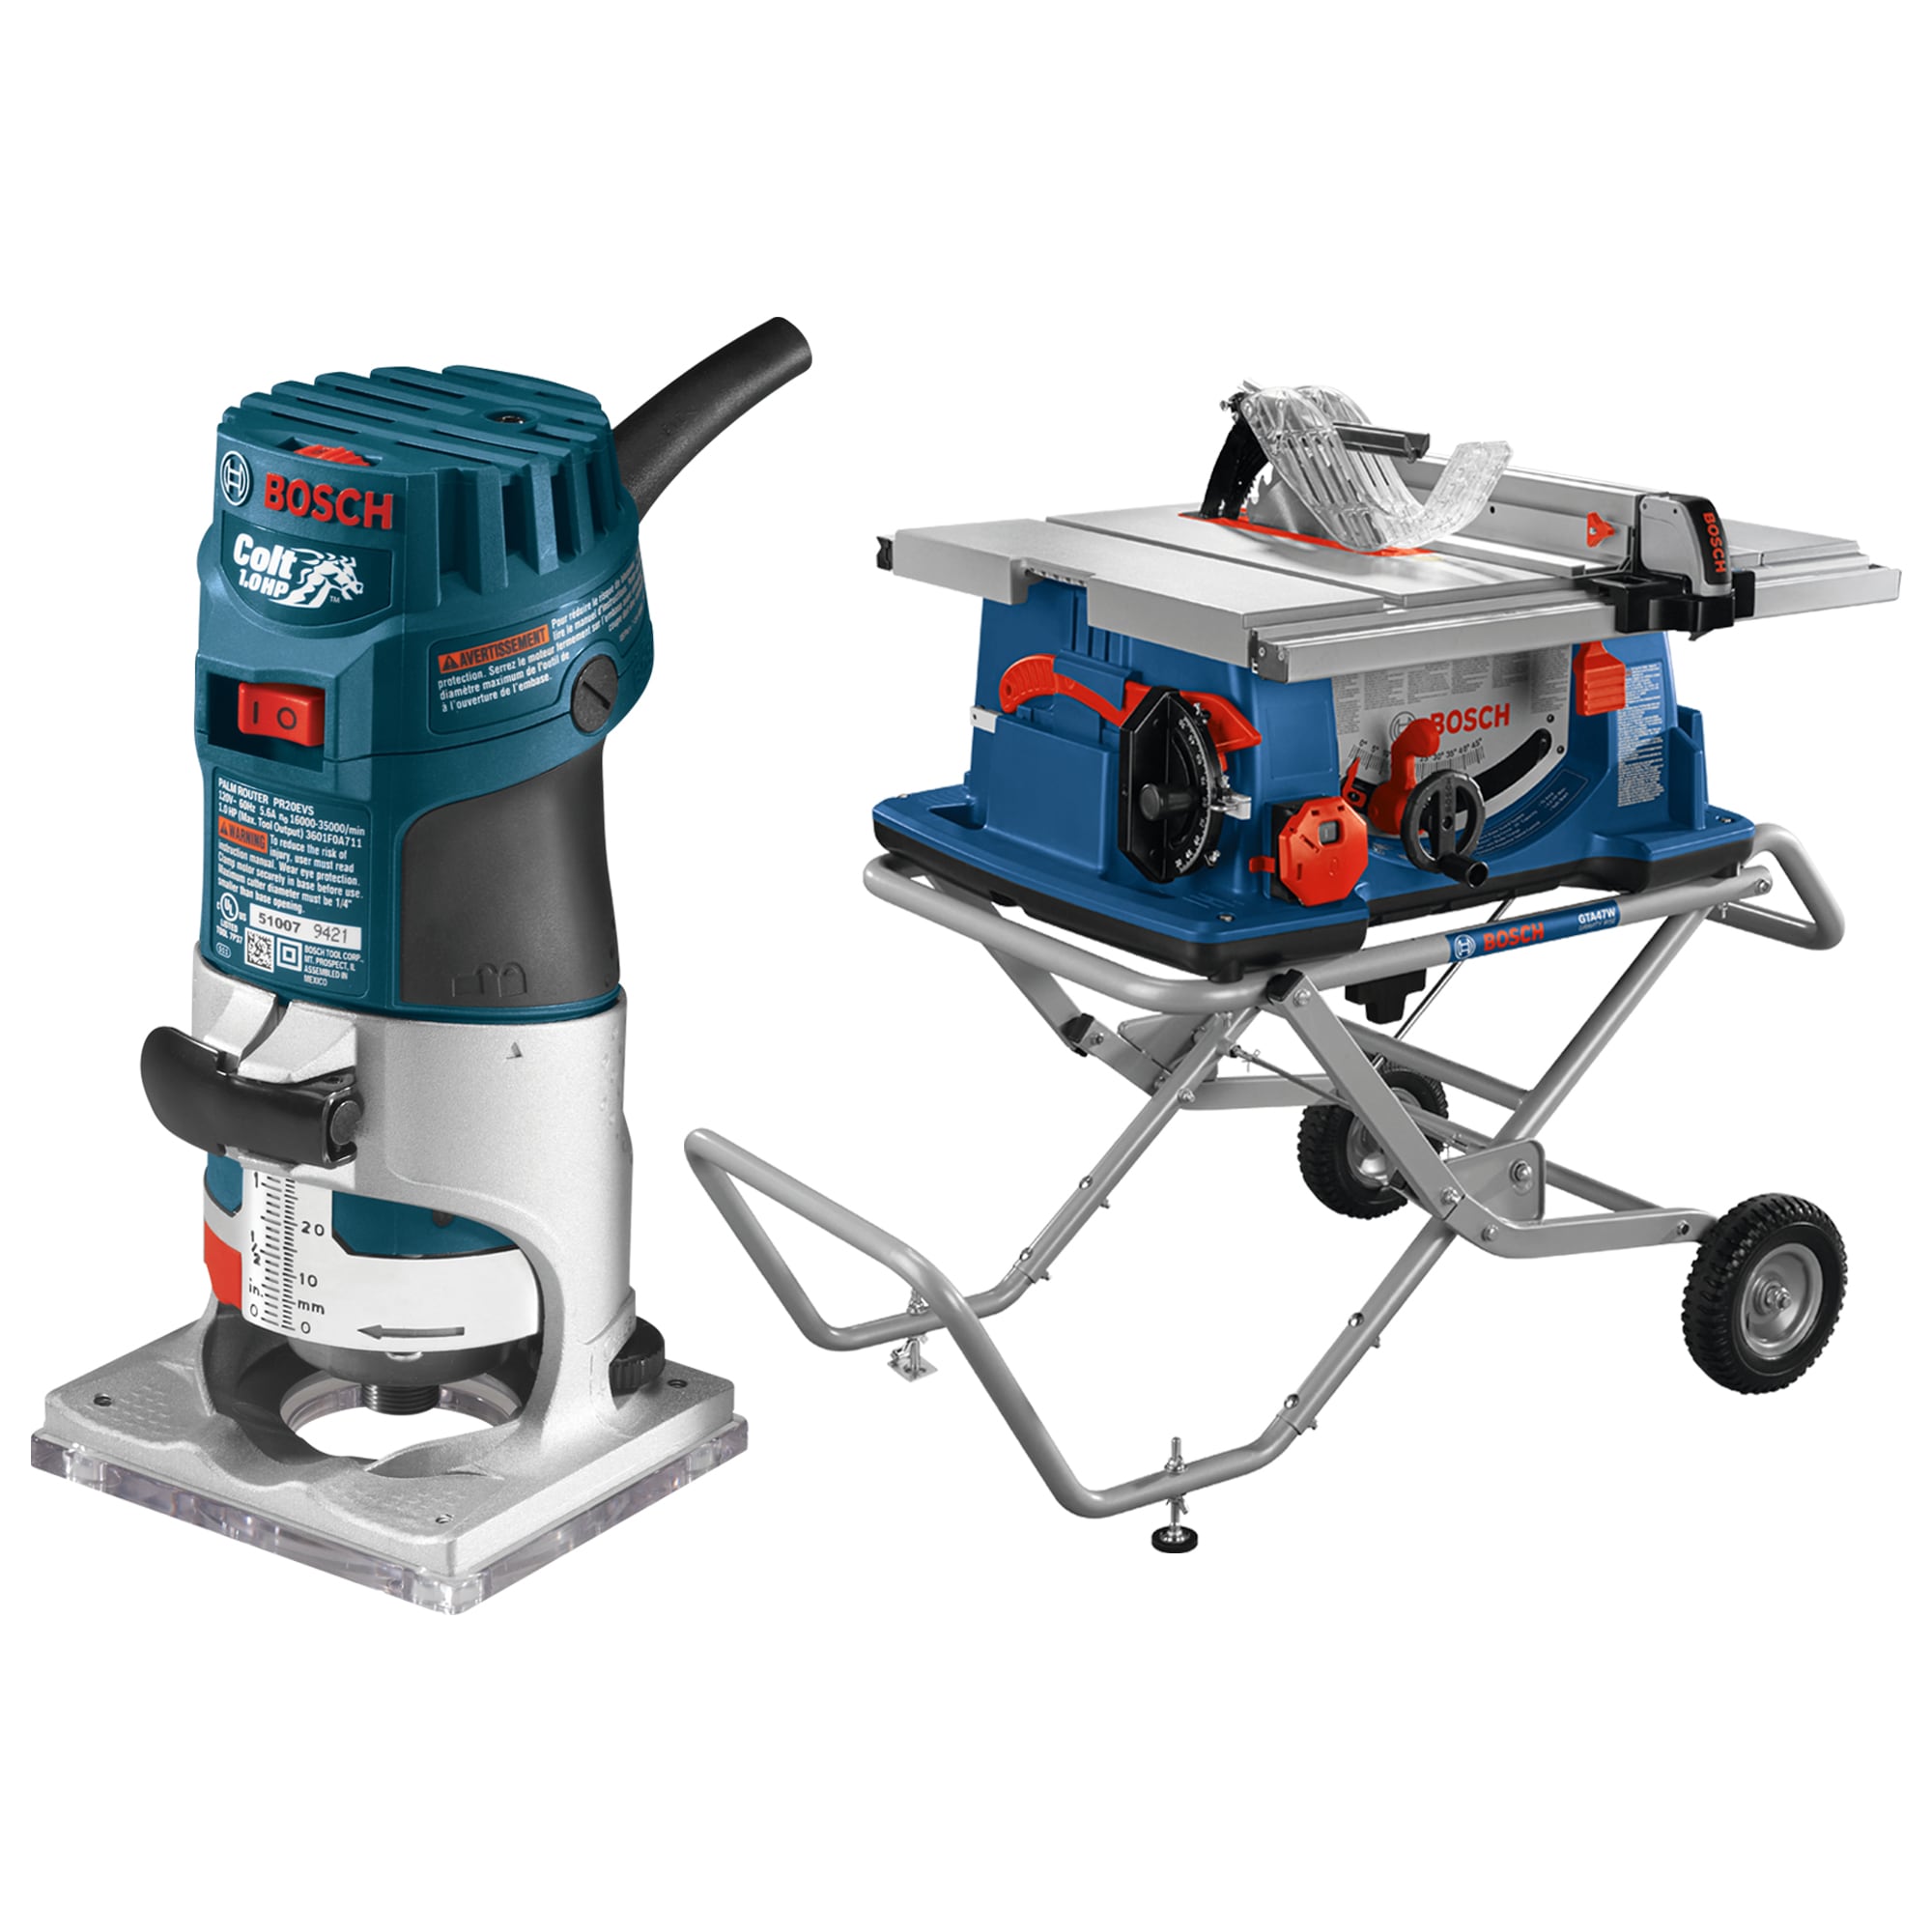 Bosch 10"" Worksite Table Saw w/ Gravity-Rise Wheeled Stand + 1 HP Variable Speed Palm Router